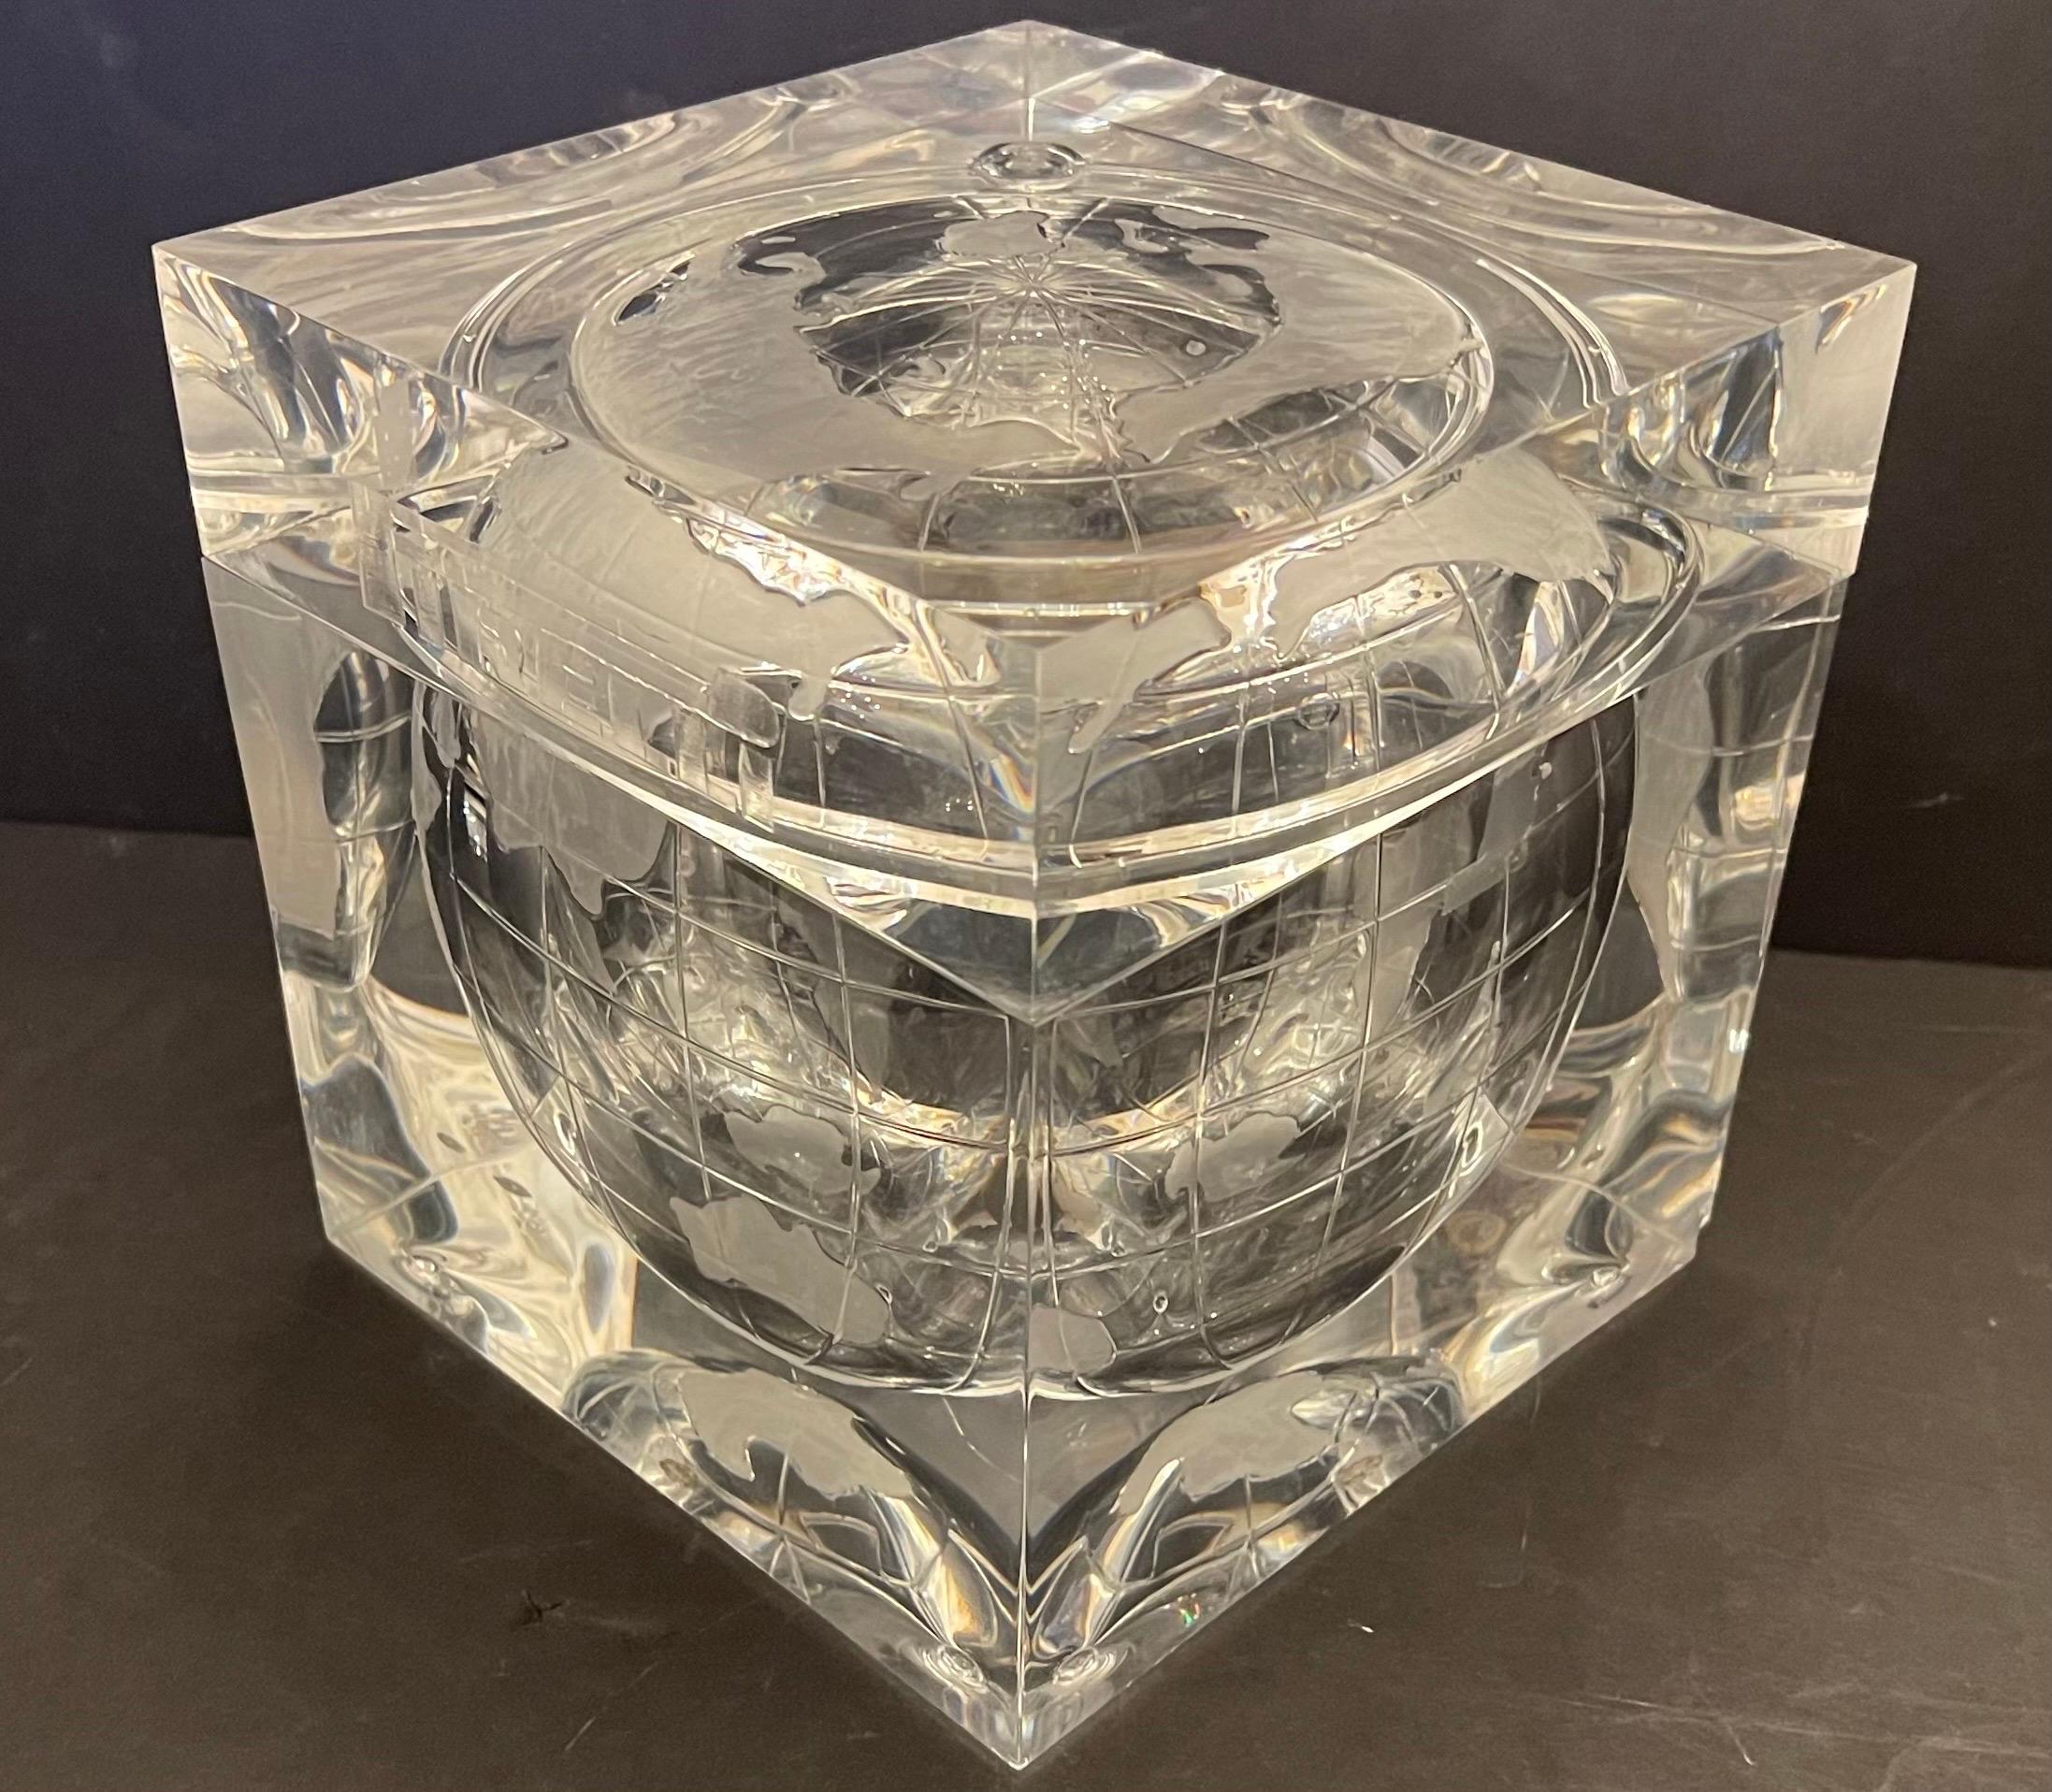 A Wonderful Heavy Lucite Ice Bucket / Cooler In The Form Of A World Globe Suspended In A Cube. The Interior Is Embossed With Earth Having Longitude And Latitude Lines. Across The Top Portion Written Pirelli
Very Small Chip In One Corner Other Then